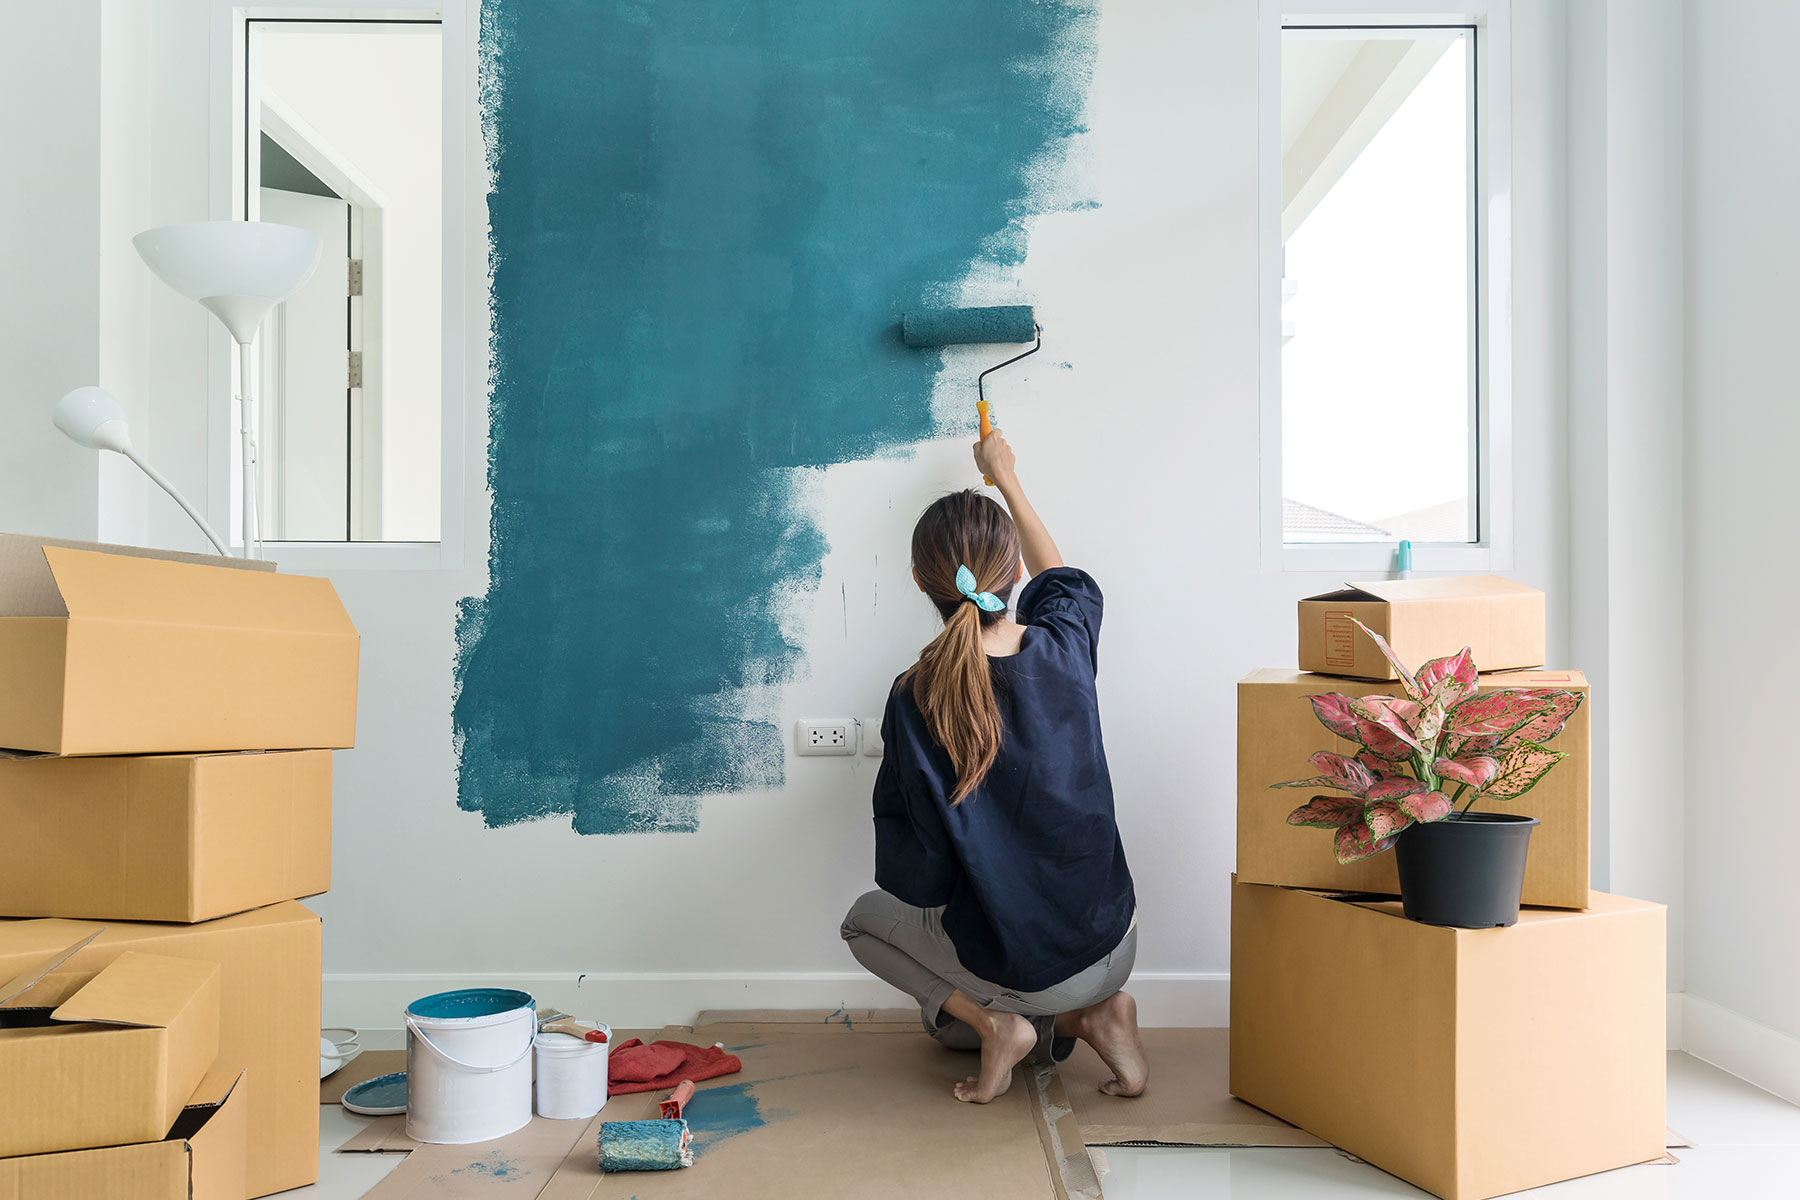 Young woman with hair in ponytail painting interior wall teal with paint roller in house